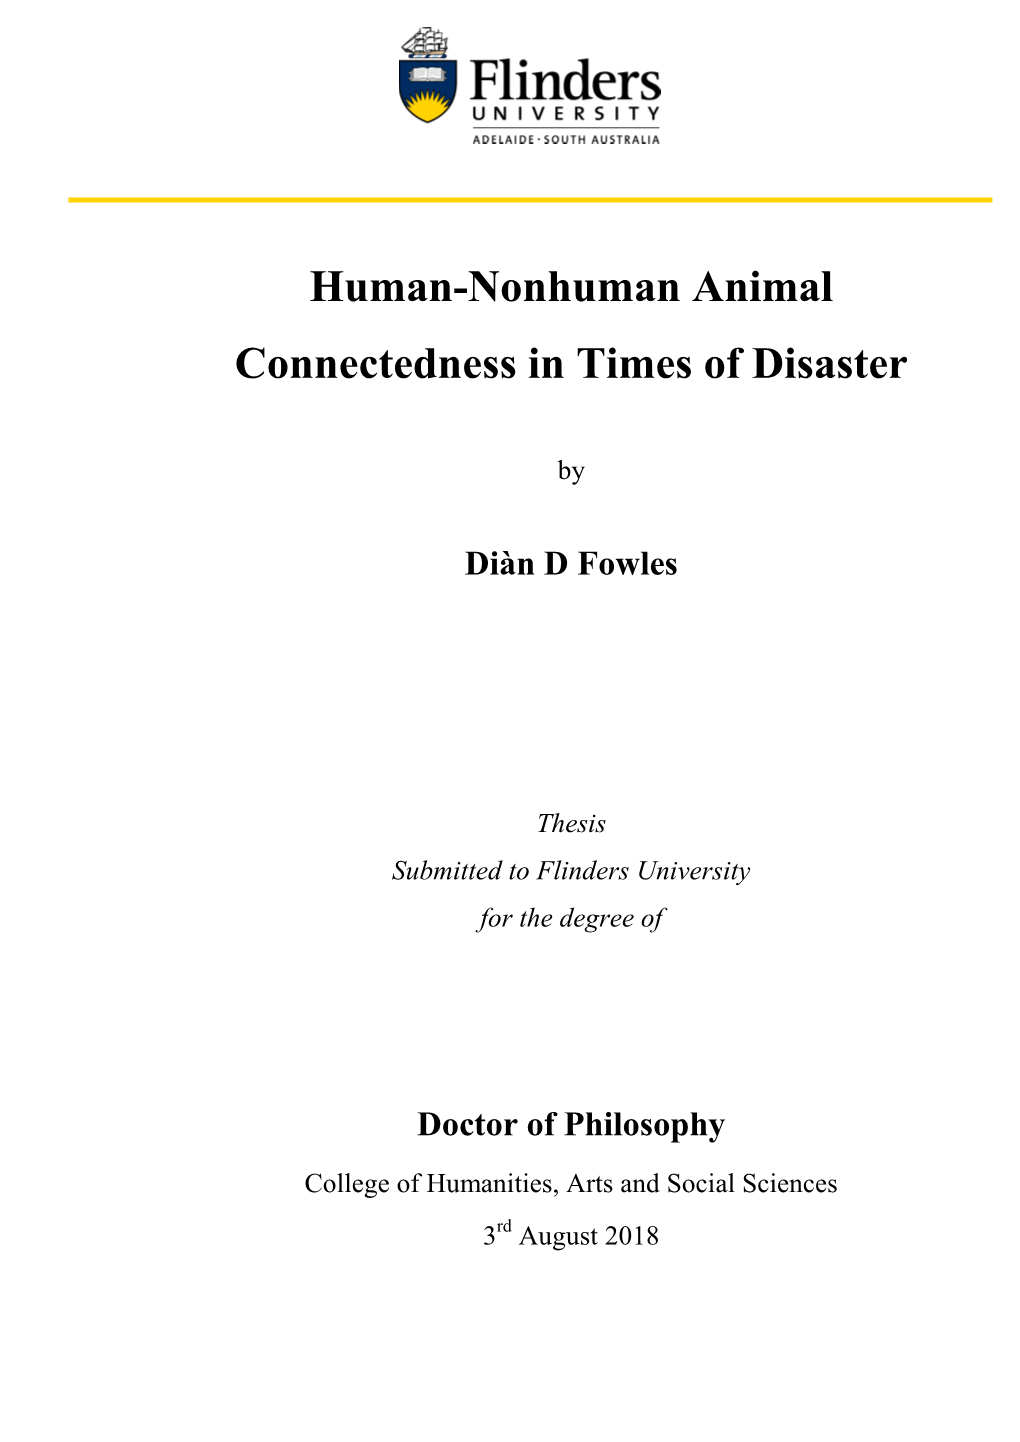 Human-Nonhuman Animal Connectedness in Times of Disaster